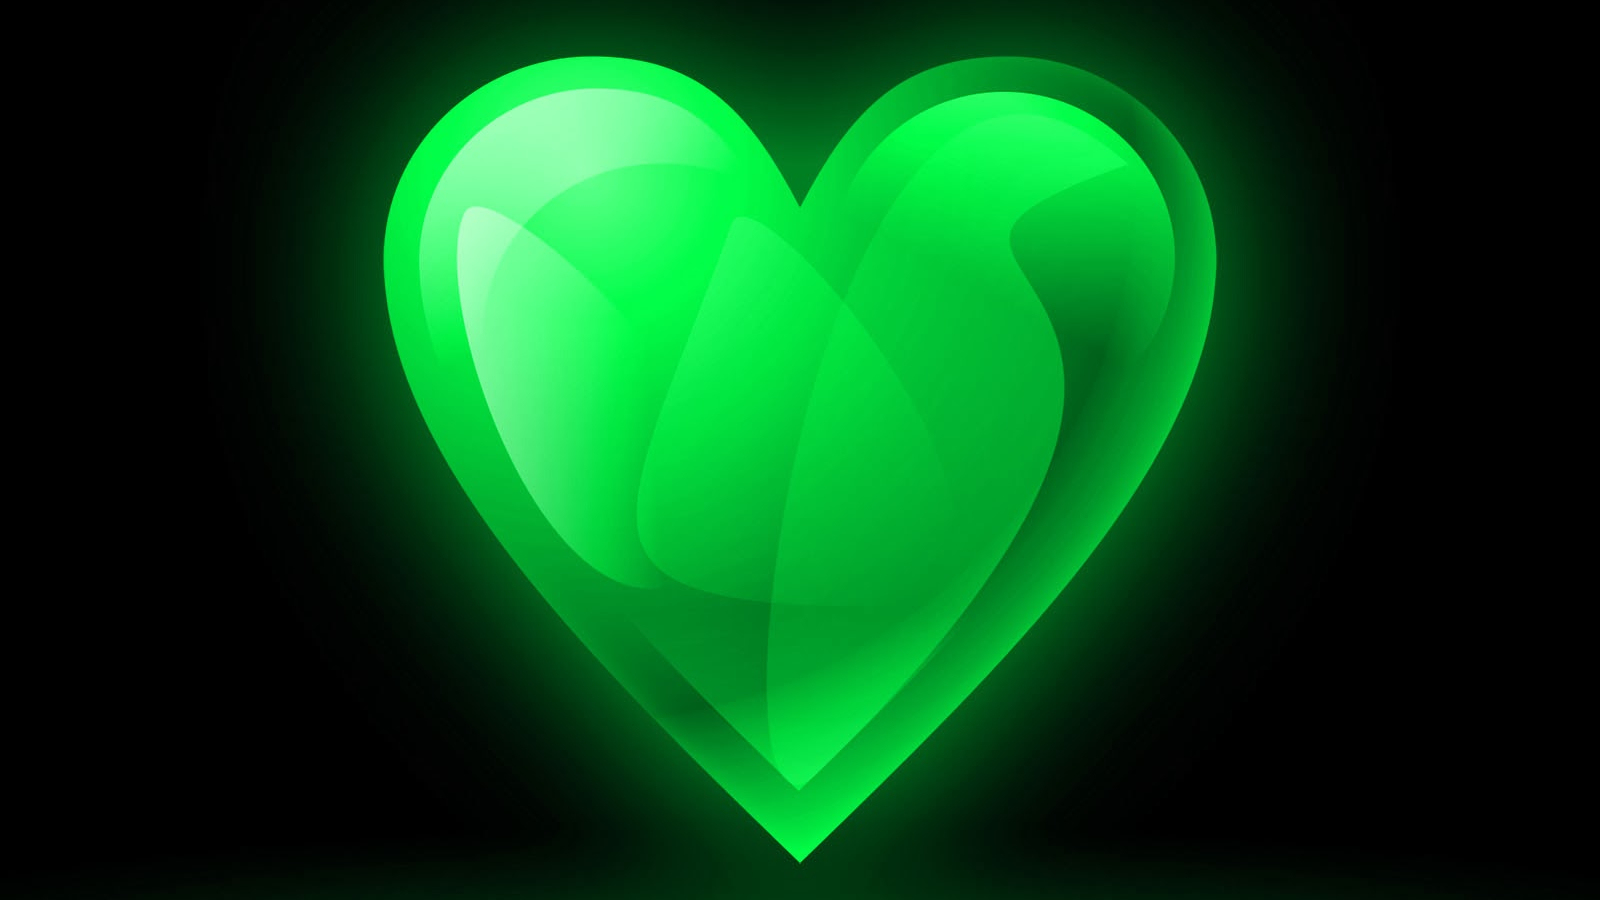 Free download Green Heart Wallpaper Green Heart Desktop Wallpaper Green Heart [1600x1000] for your Desktop, Mobile & Tablet. Explore Heart Background. Kingdom Hearts Wallpaper, Heart Wallpaper